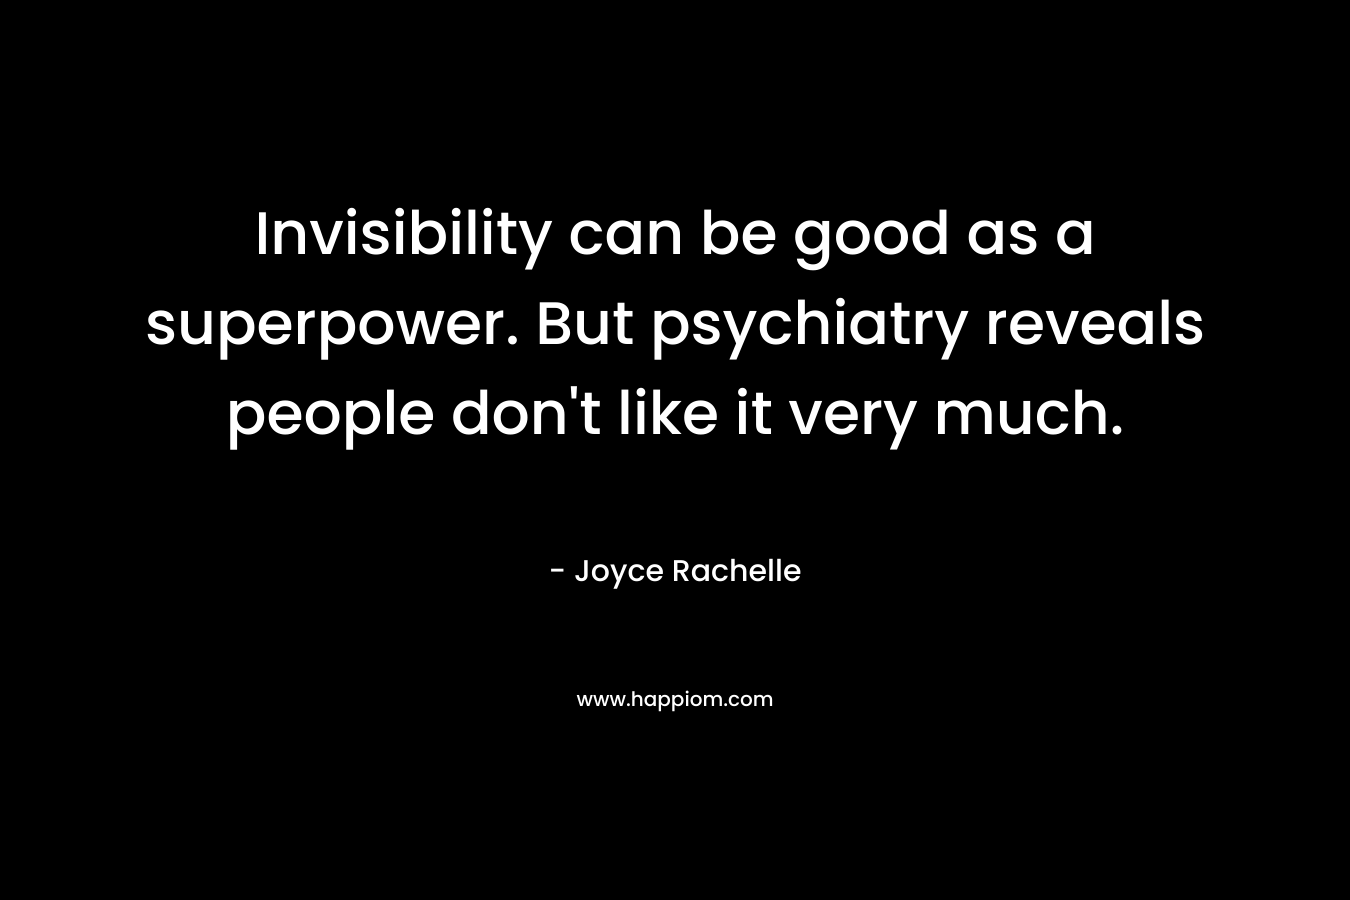 Invisibility can be good as a superpower. But psychiatry reveals people don't like it very much.